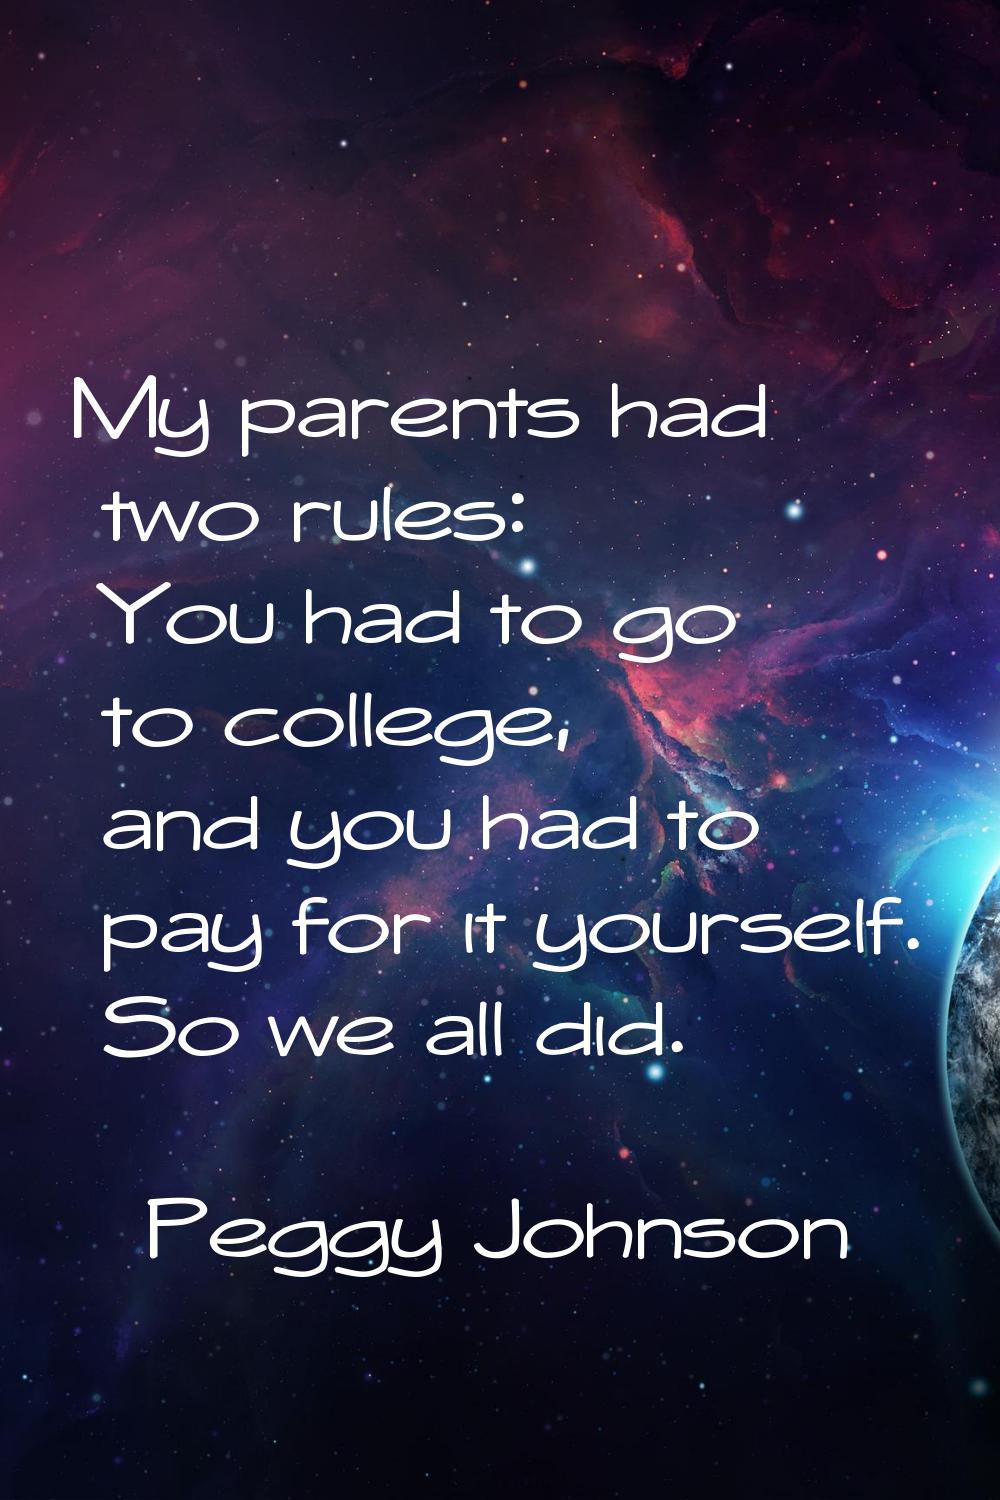 My parents had two rules: You had to go to college, and you had to pay for it yourself. So we all d